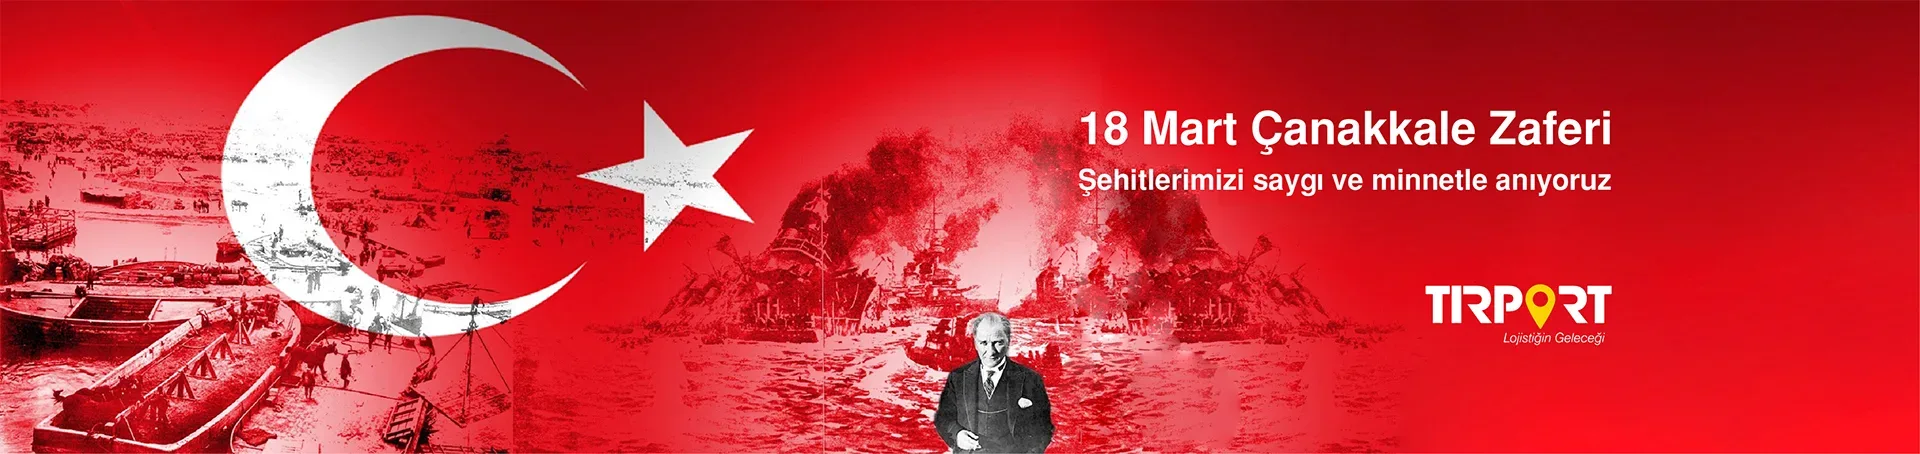 104. We commemorate our Çanakkale Martyrs with Respect and Gratitude.